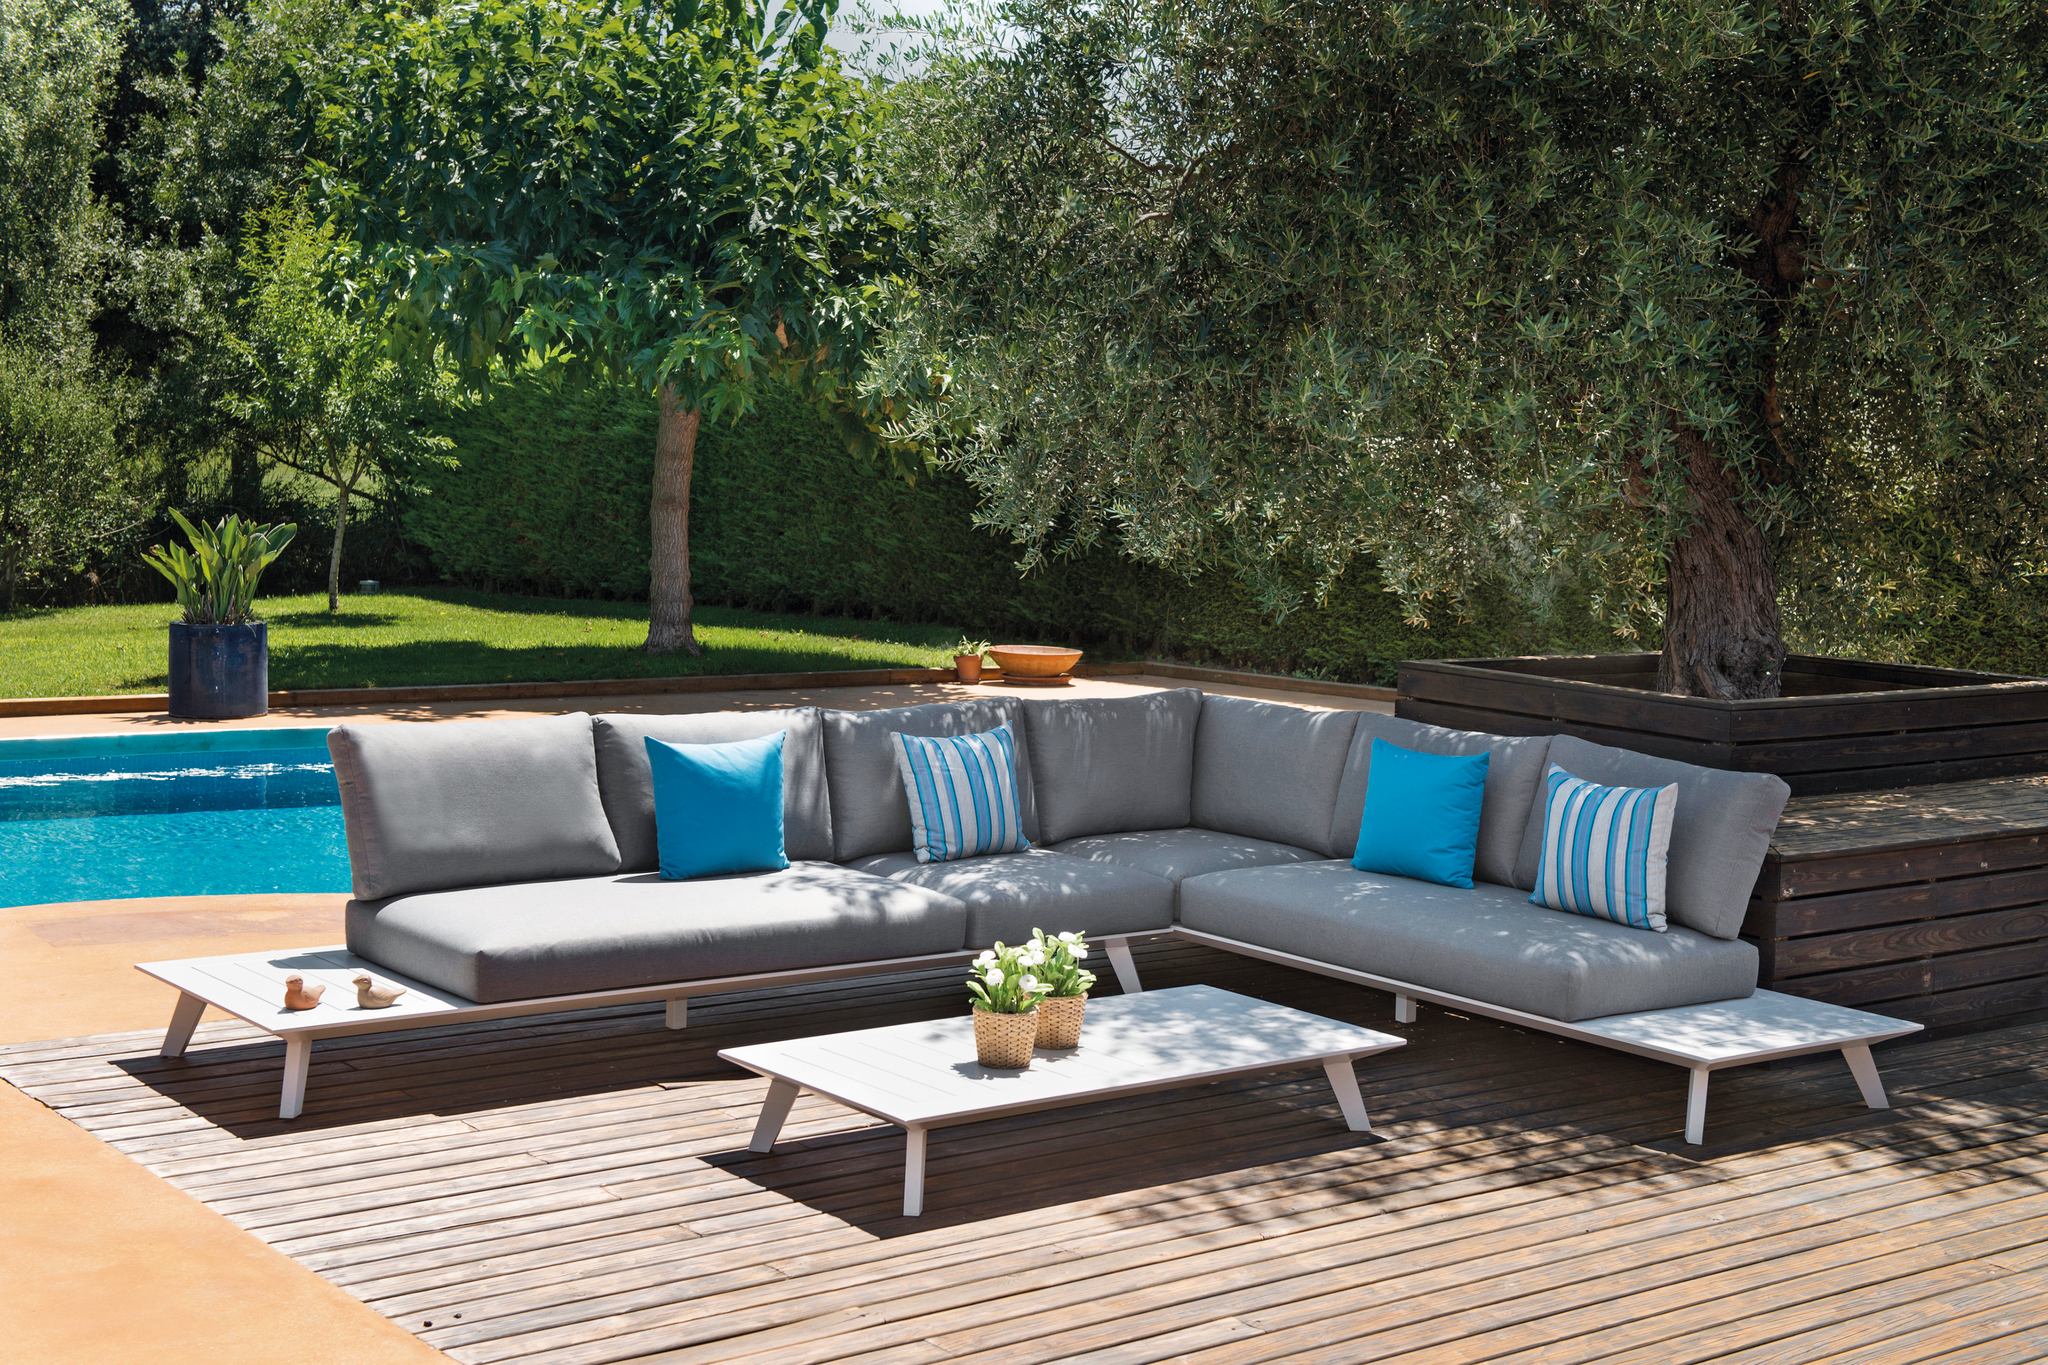 3 Reasons A Modular Outdoor Lounge Is Your Perfect Outdoor Solution